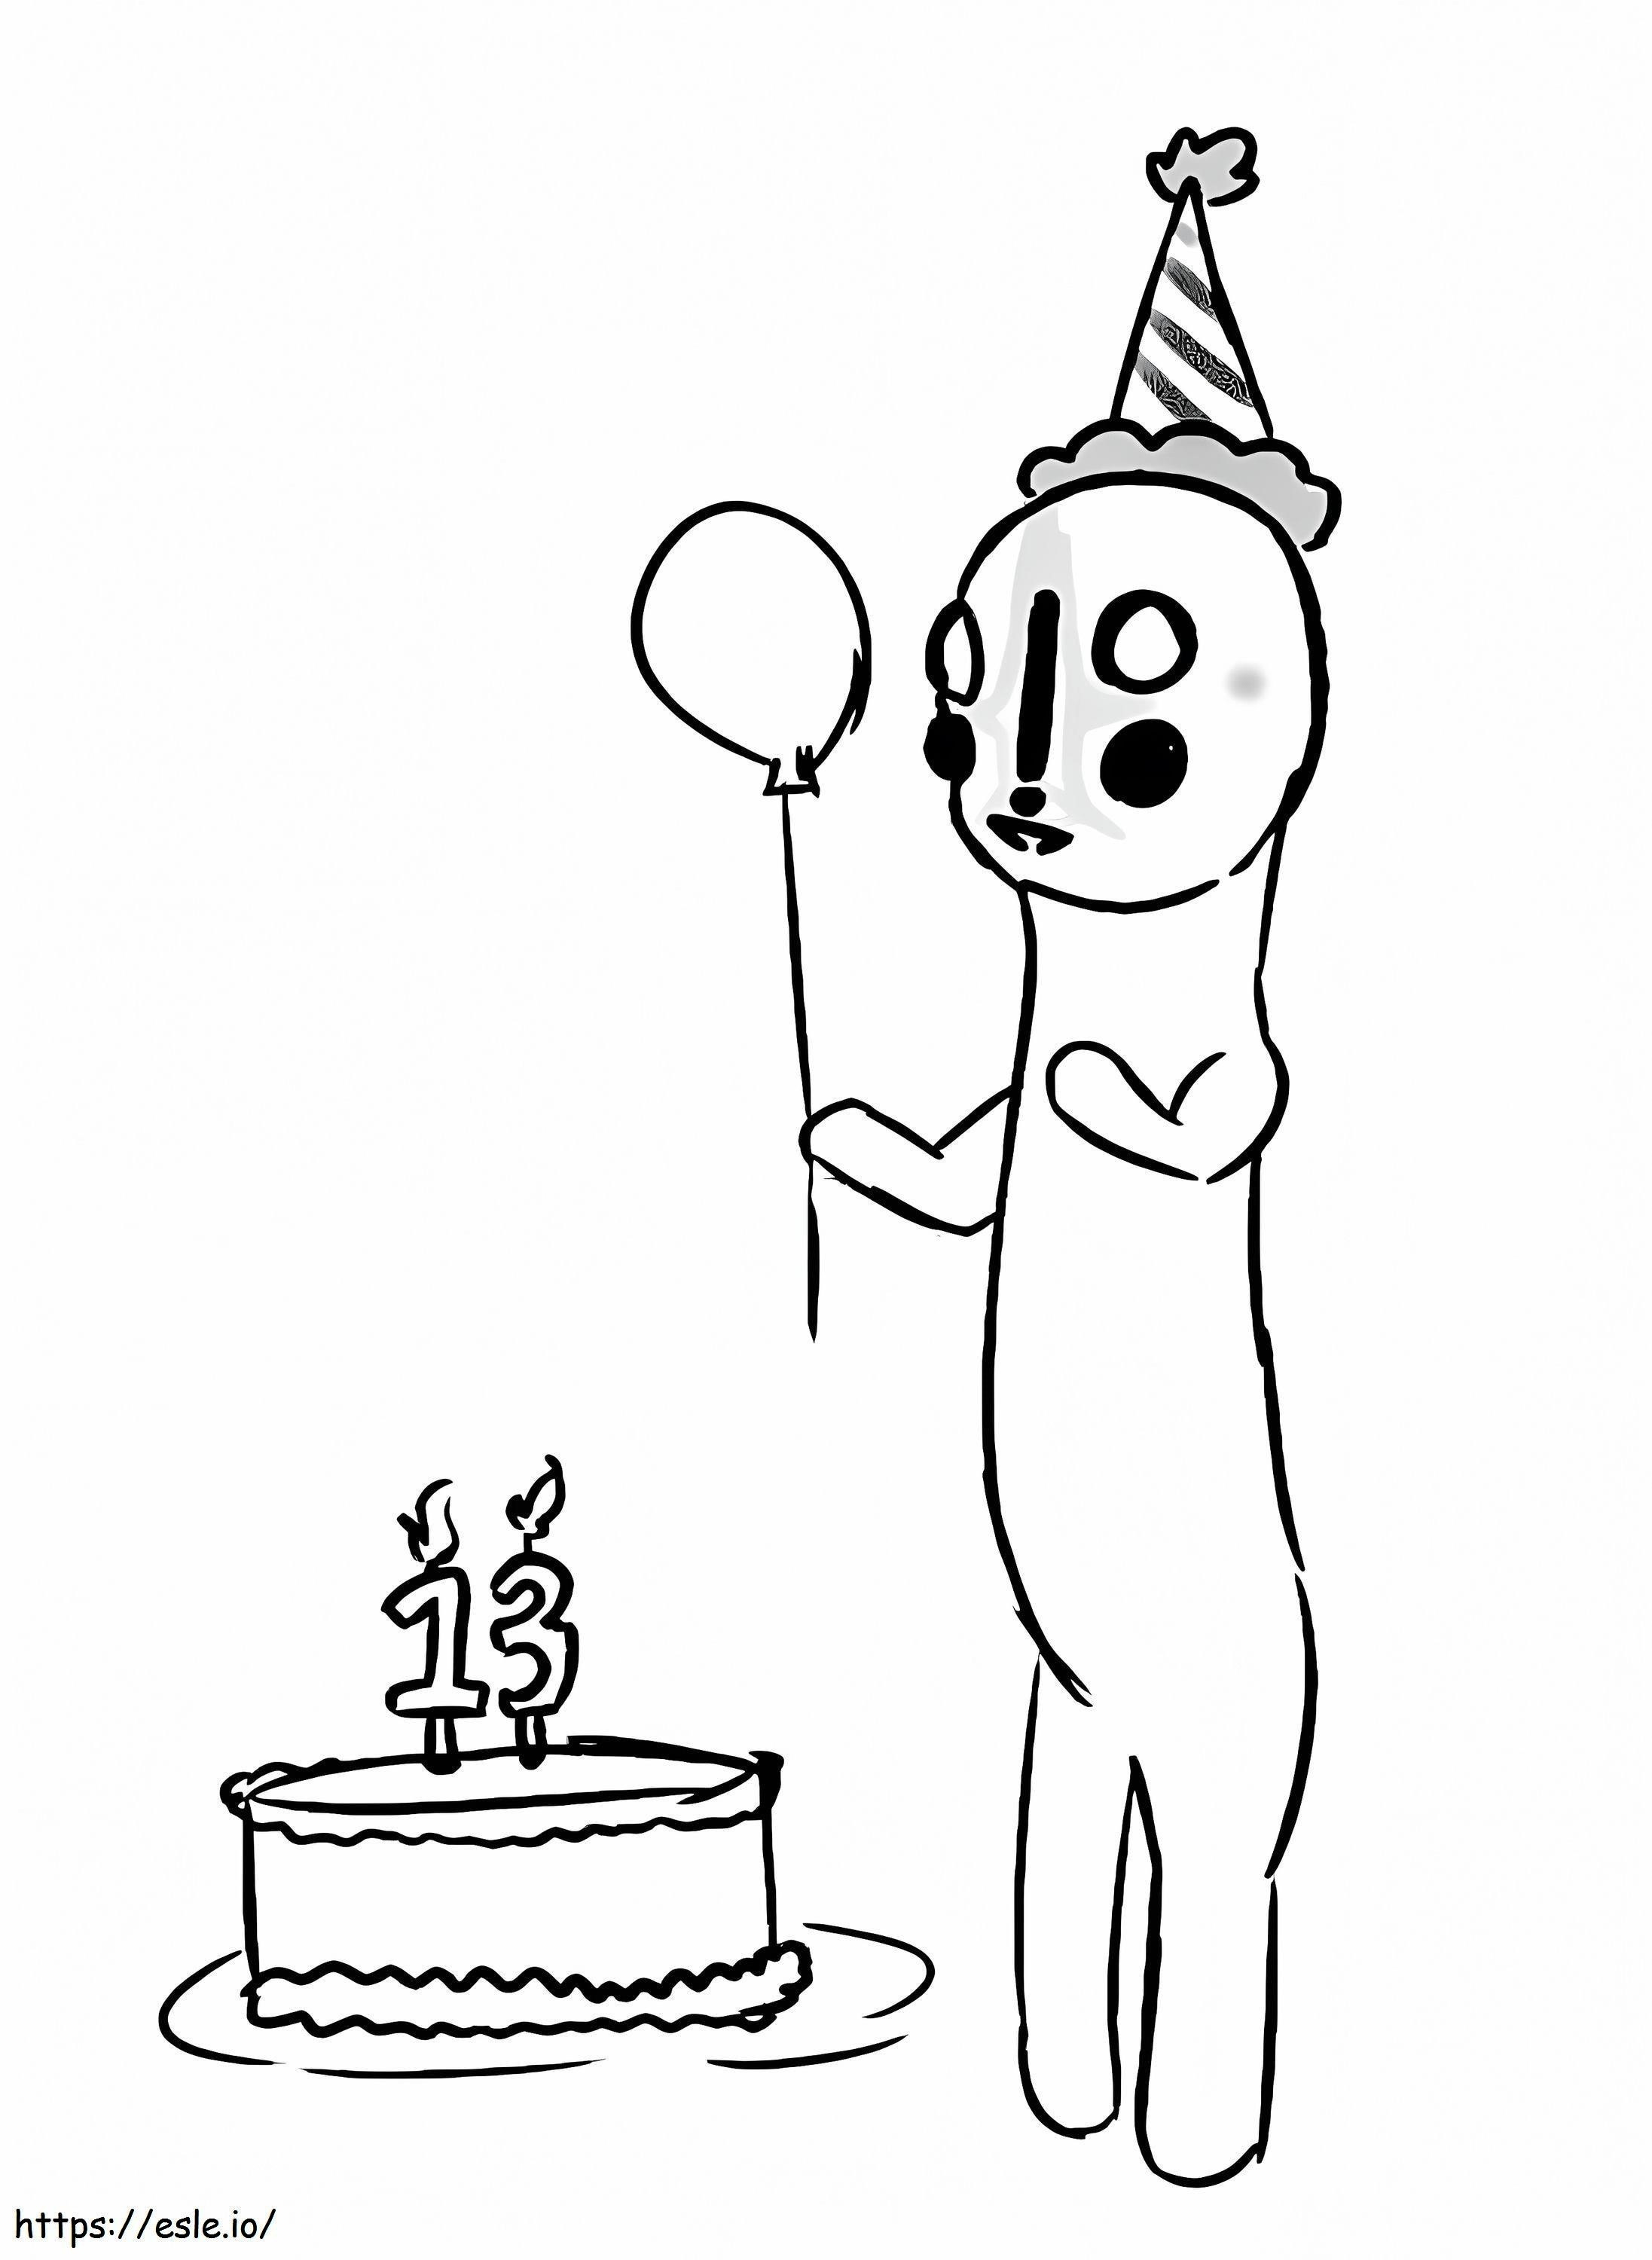 Scp 173 Birthday coloring page